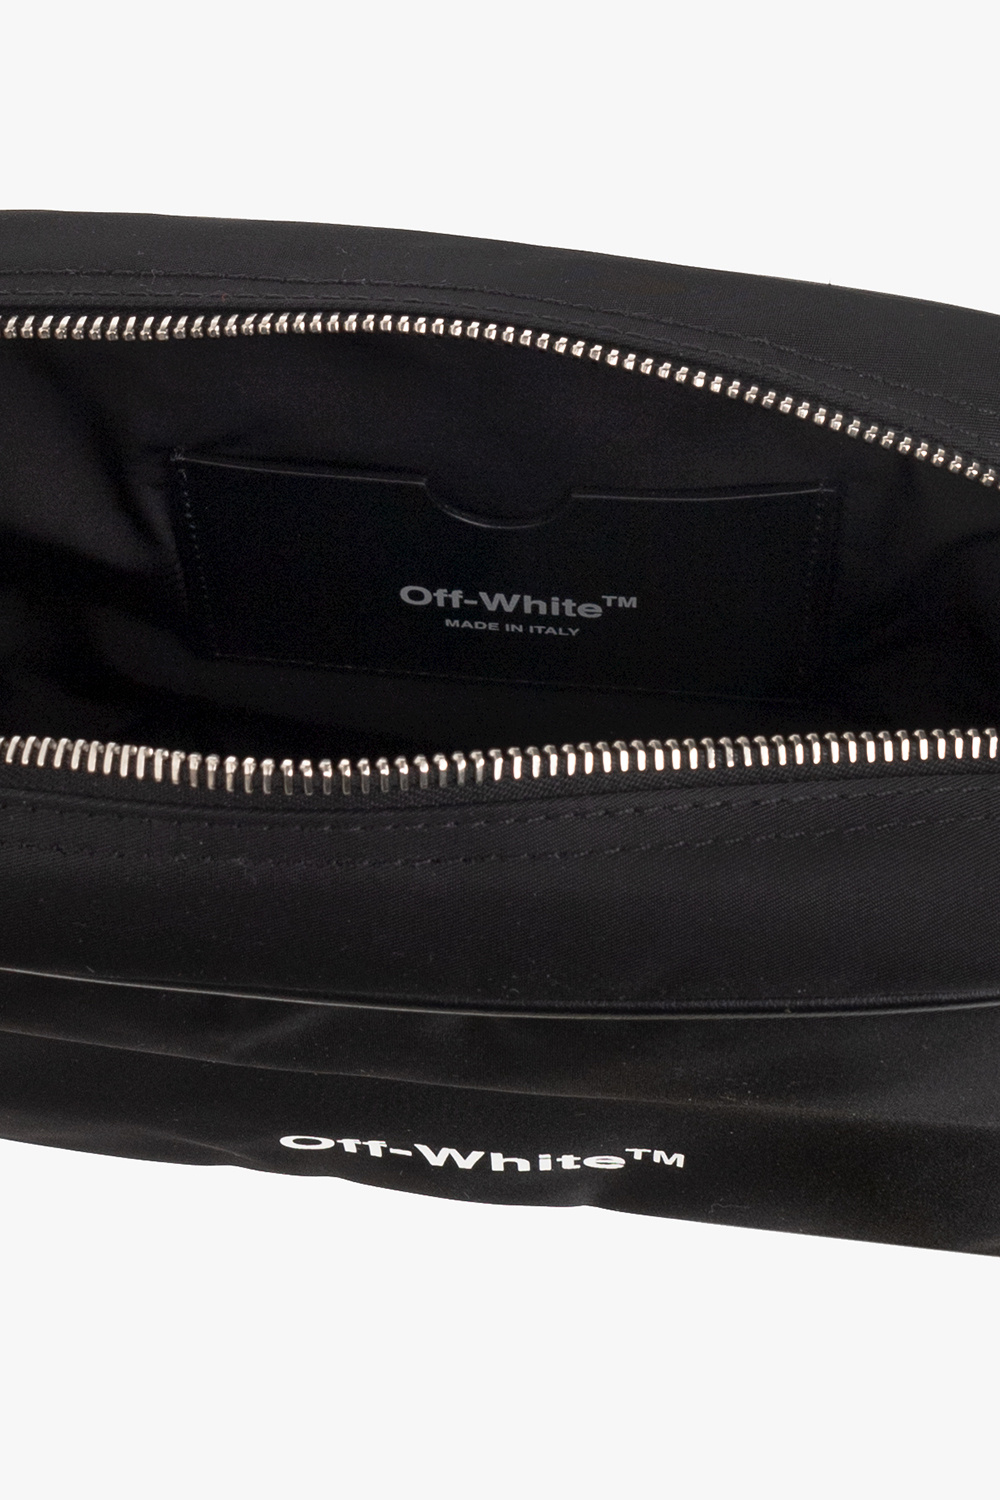 Off-White Revamp your classic bag collection with the luxe